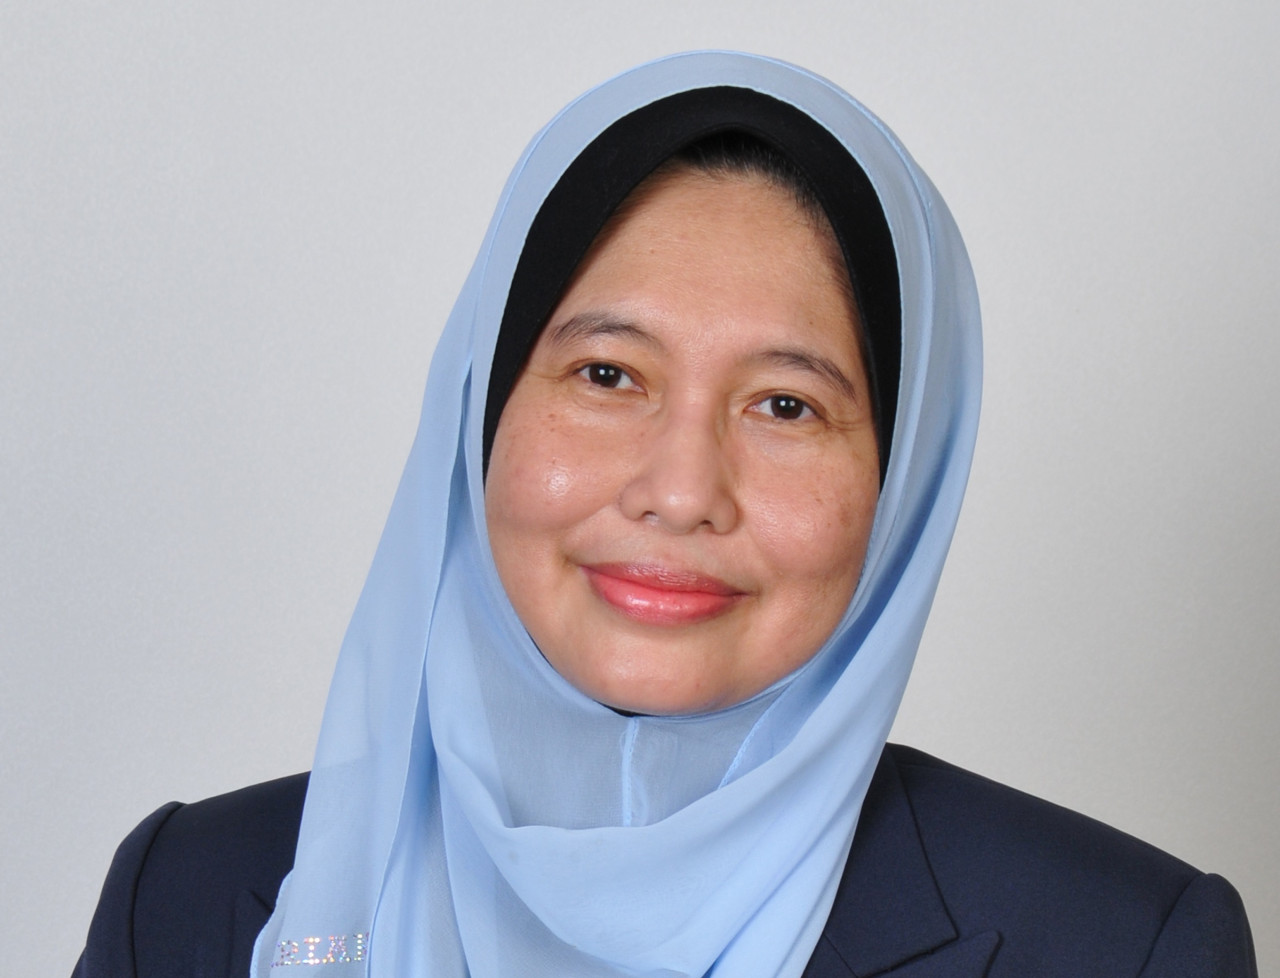 Assoc Prof Wan Mazlina Wan Mohamed says the automated rapid transit service is likely to be Cyberjaya’s catalyst to attract urban development around the stations, as it can be a genuine fixed route transit system. – File pic, September 2, 2021